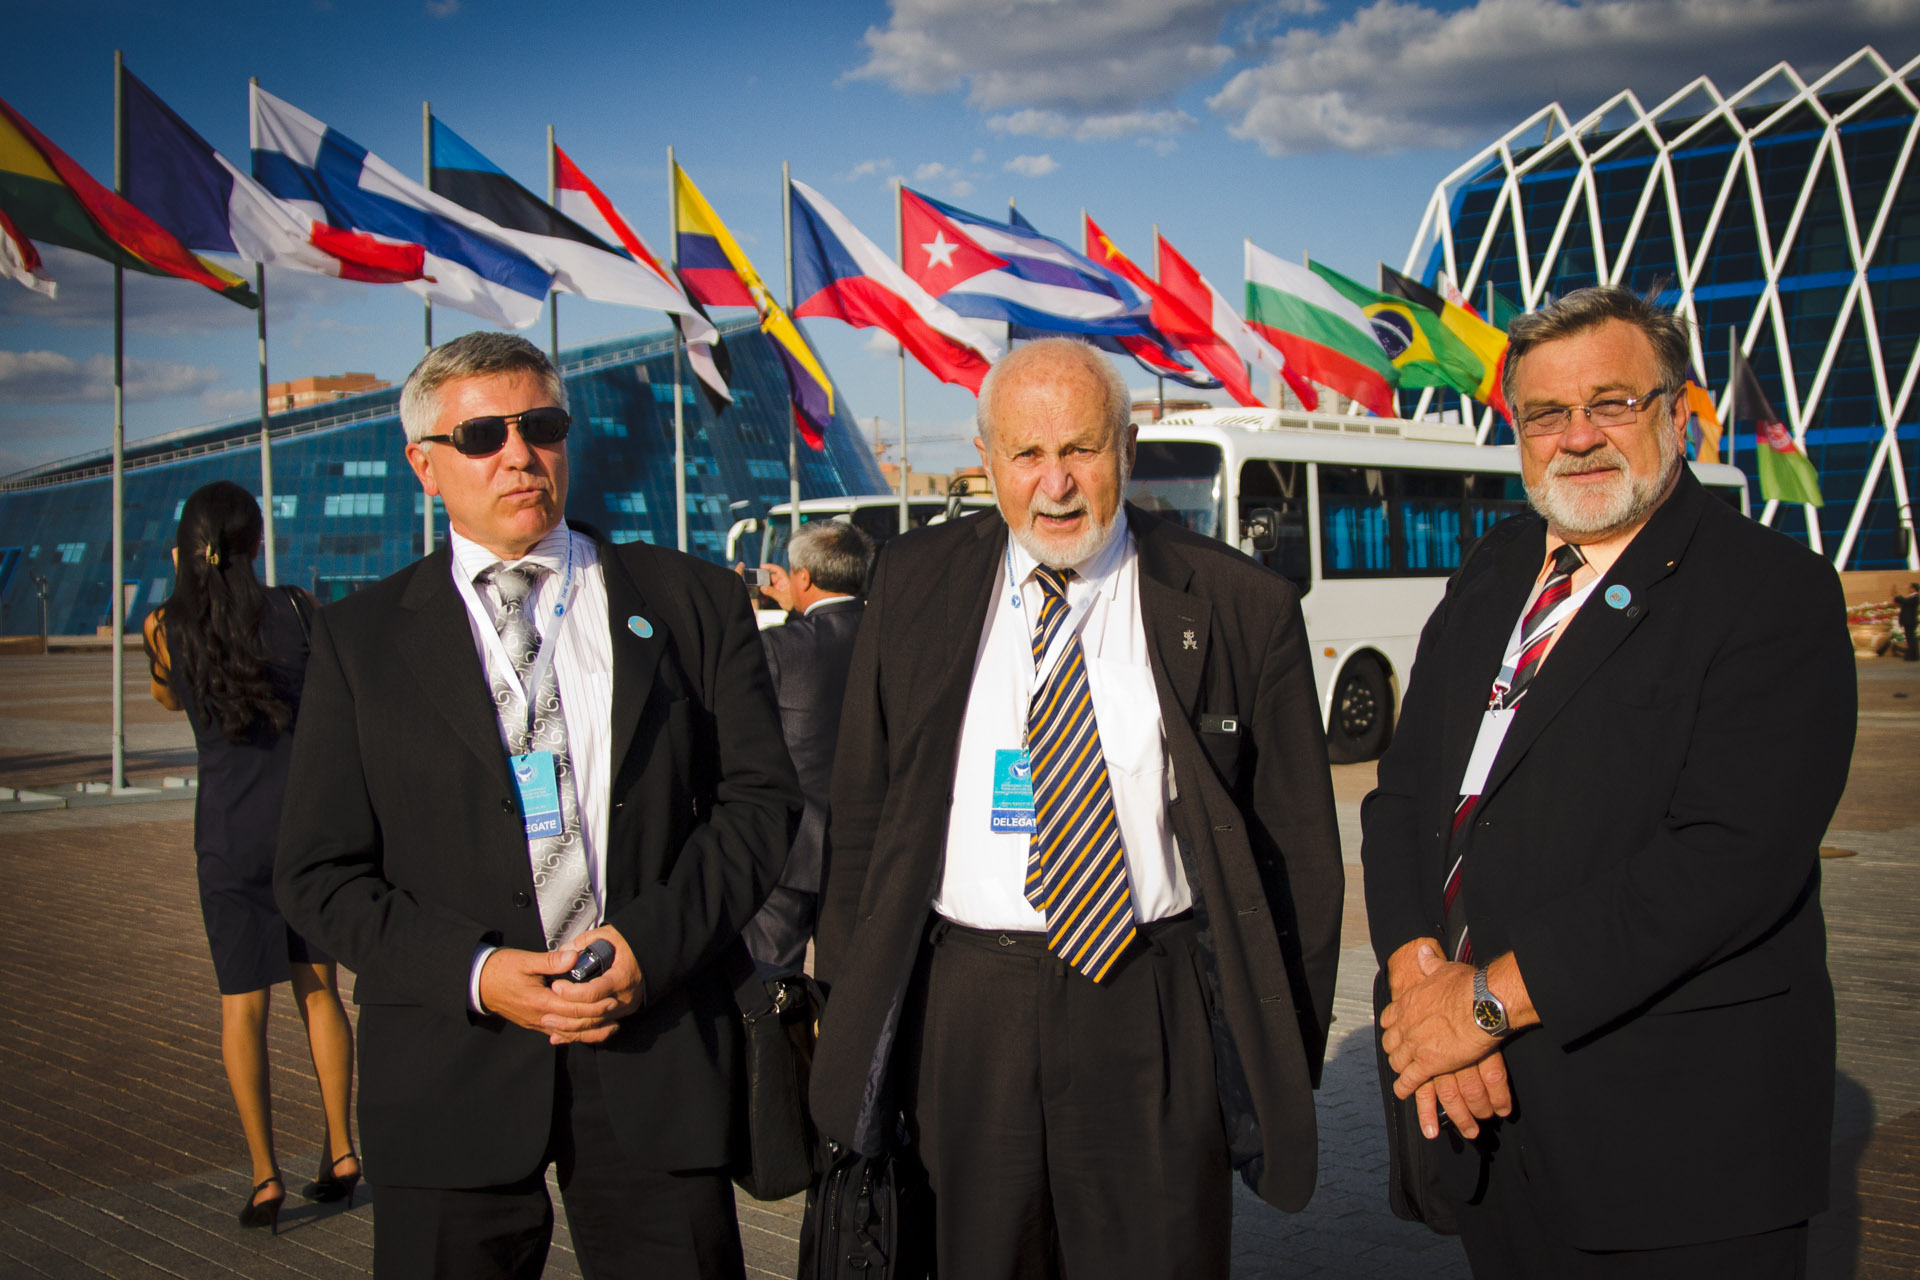 Czech delegation in front of the conference centre